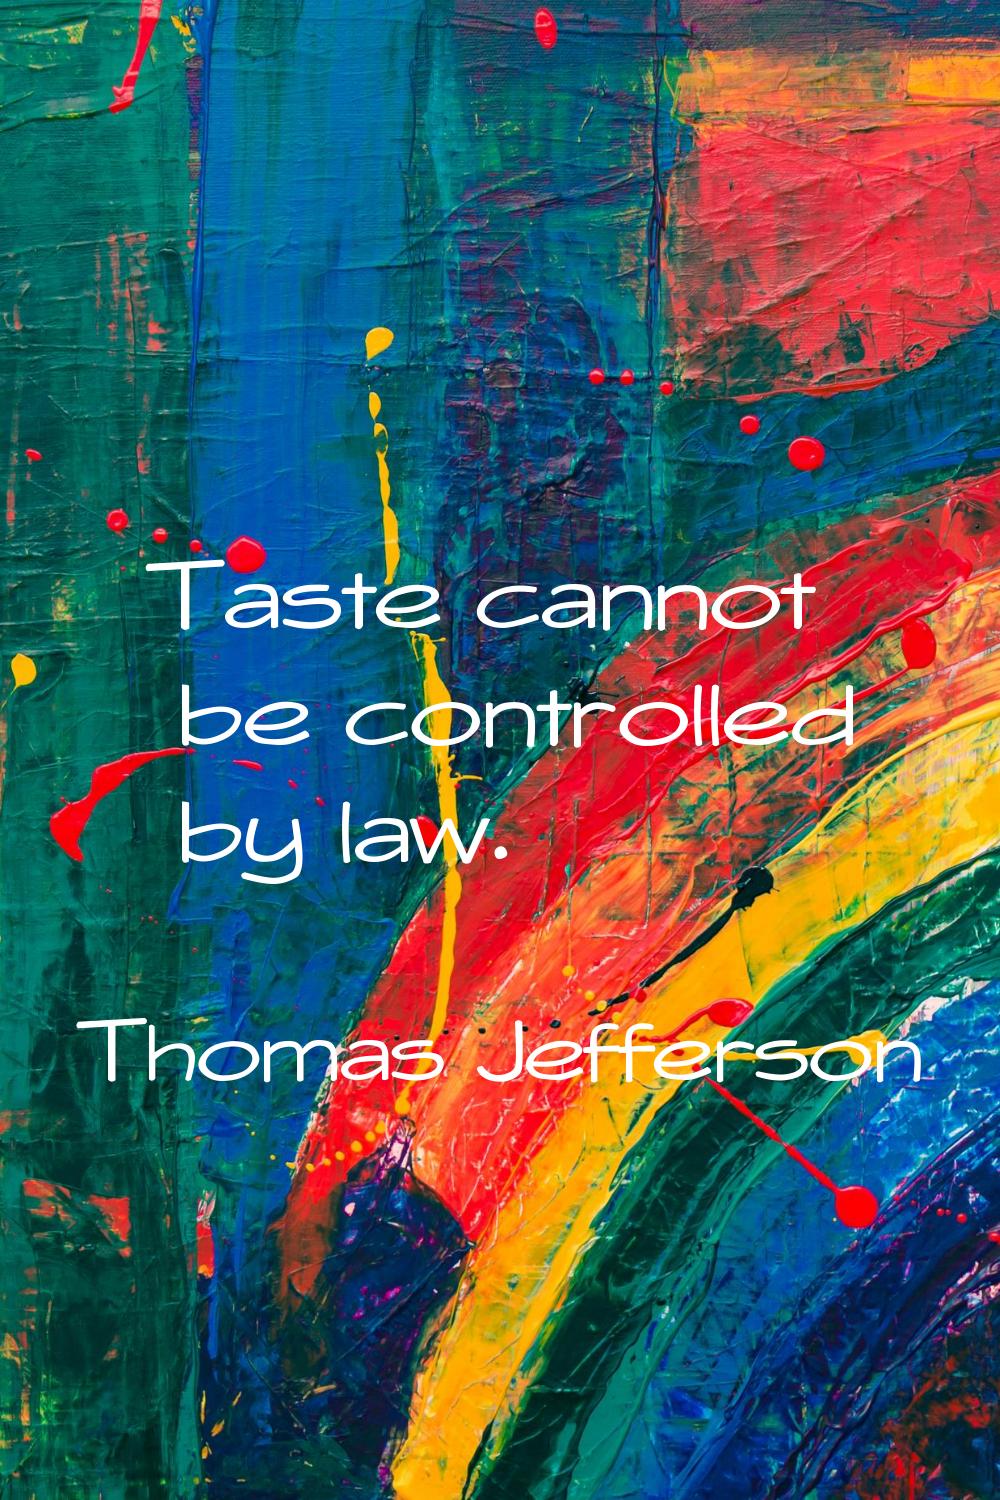 Taste cannot be controlled by law.